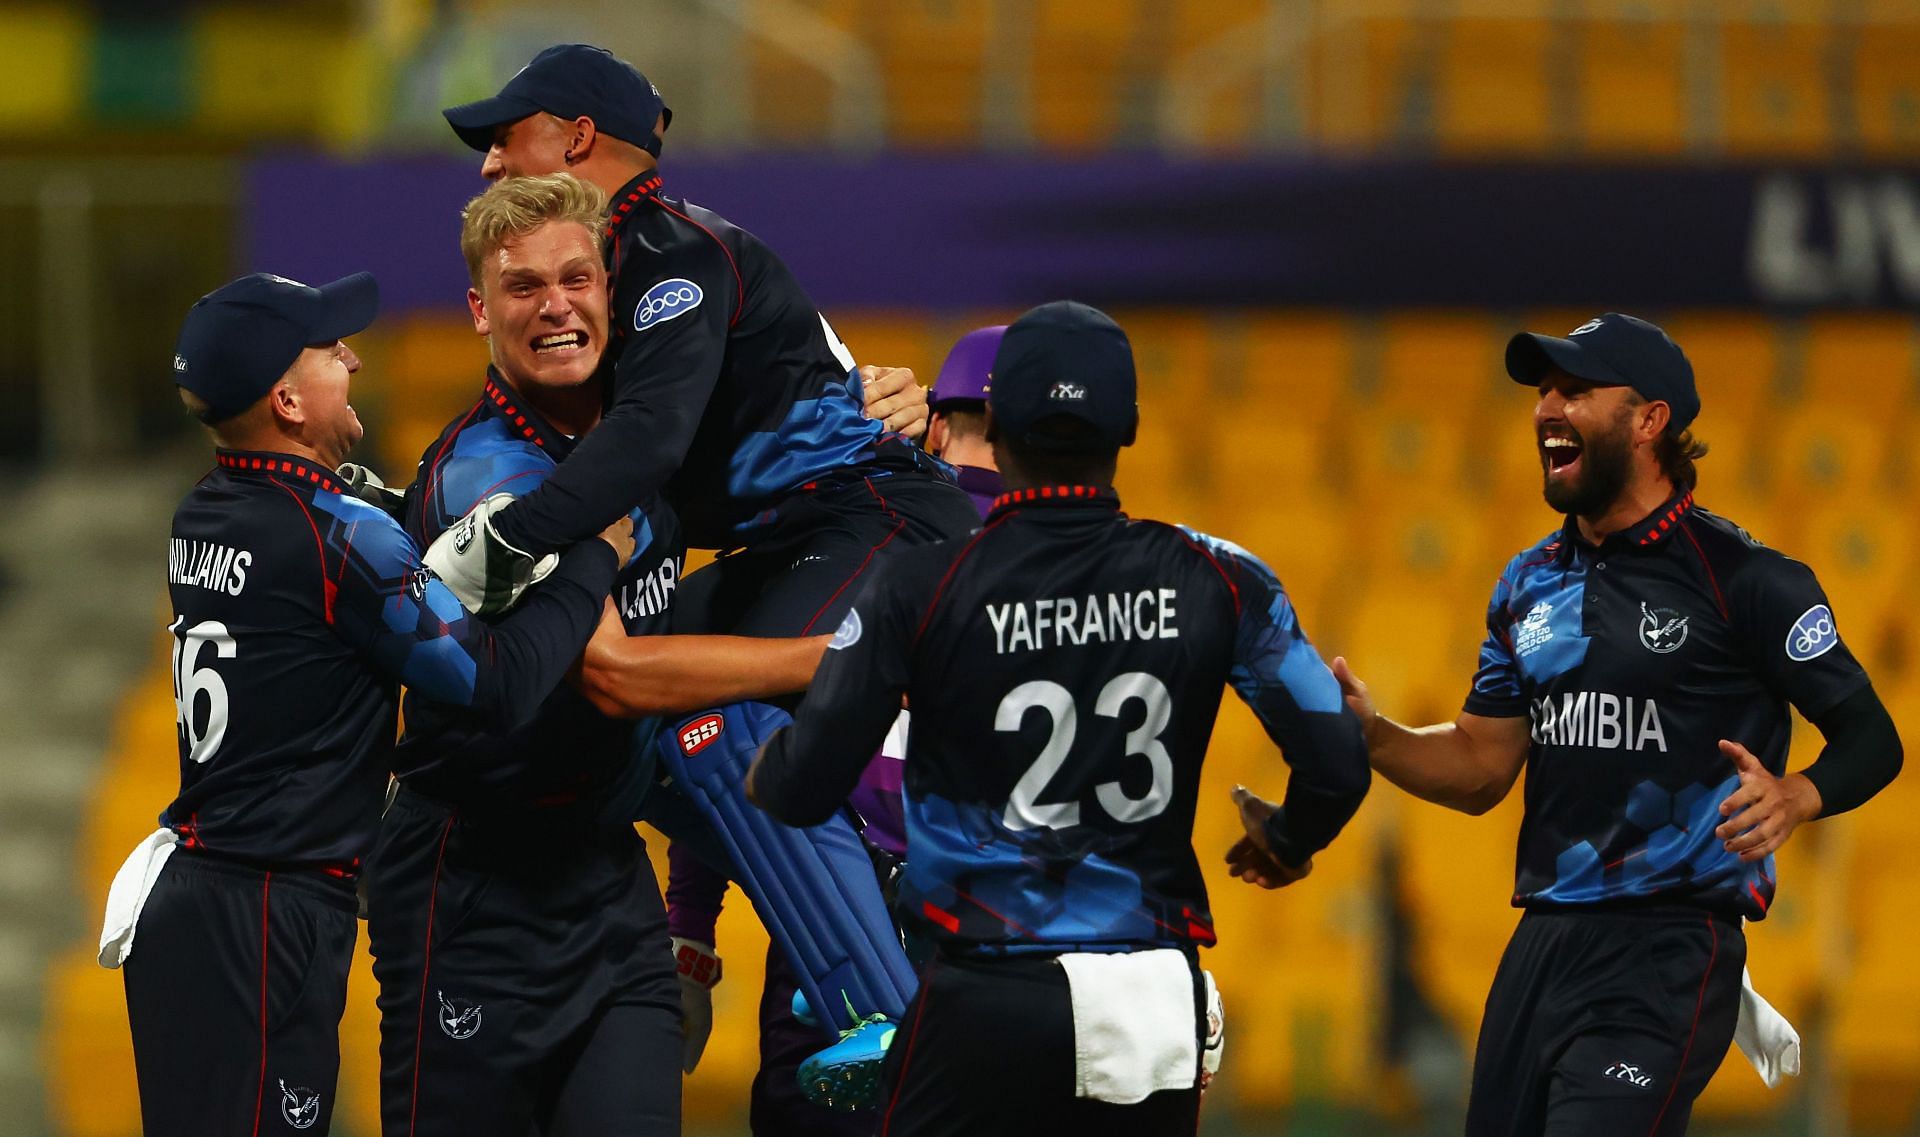 Ecstatic Namibia celebrate a wicket against Scotland. Pic: Getty Images